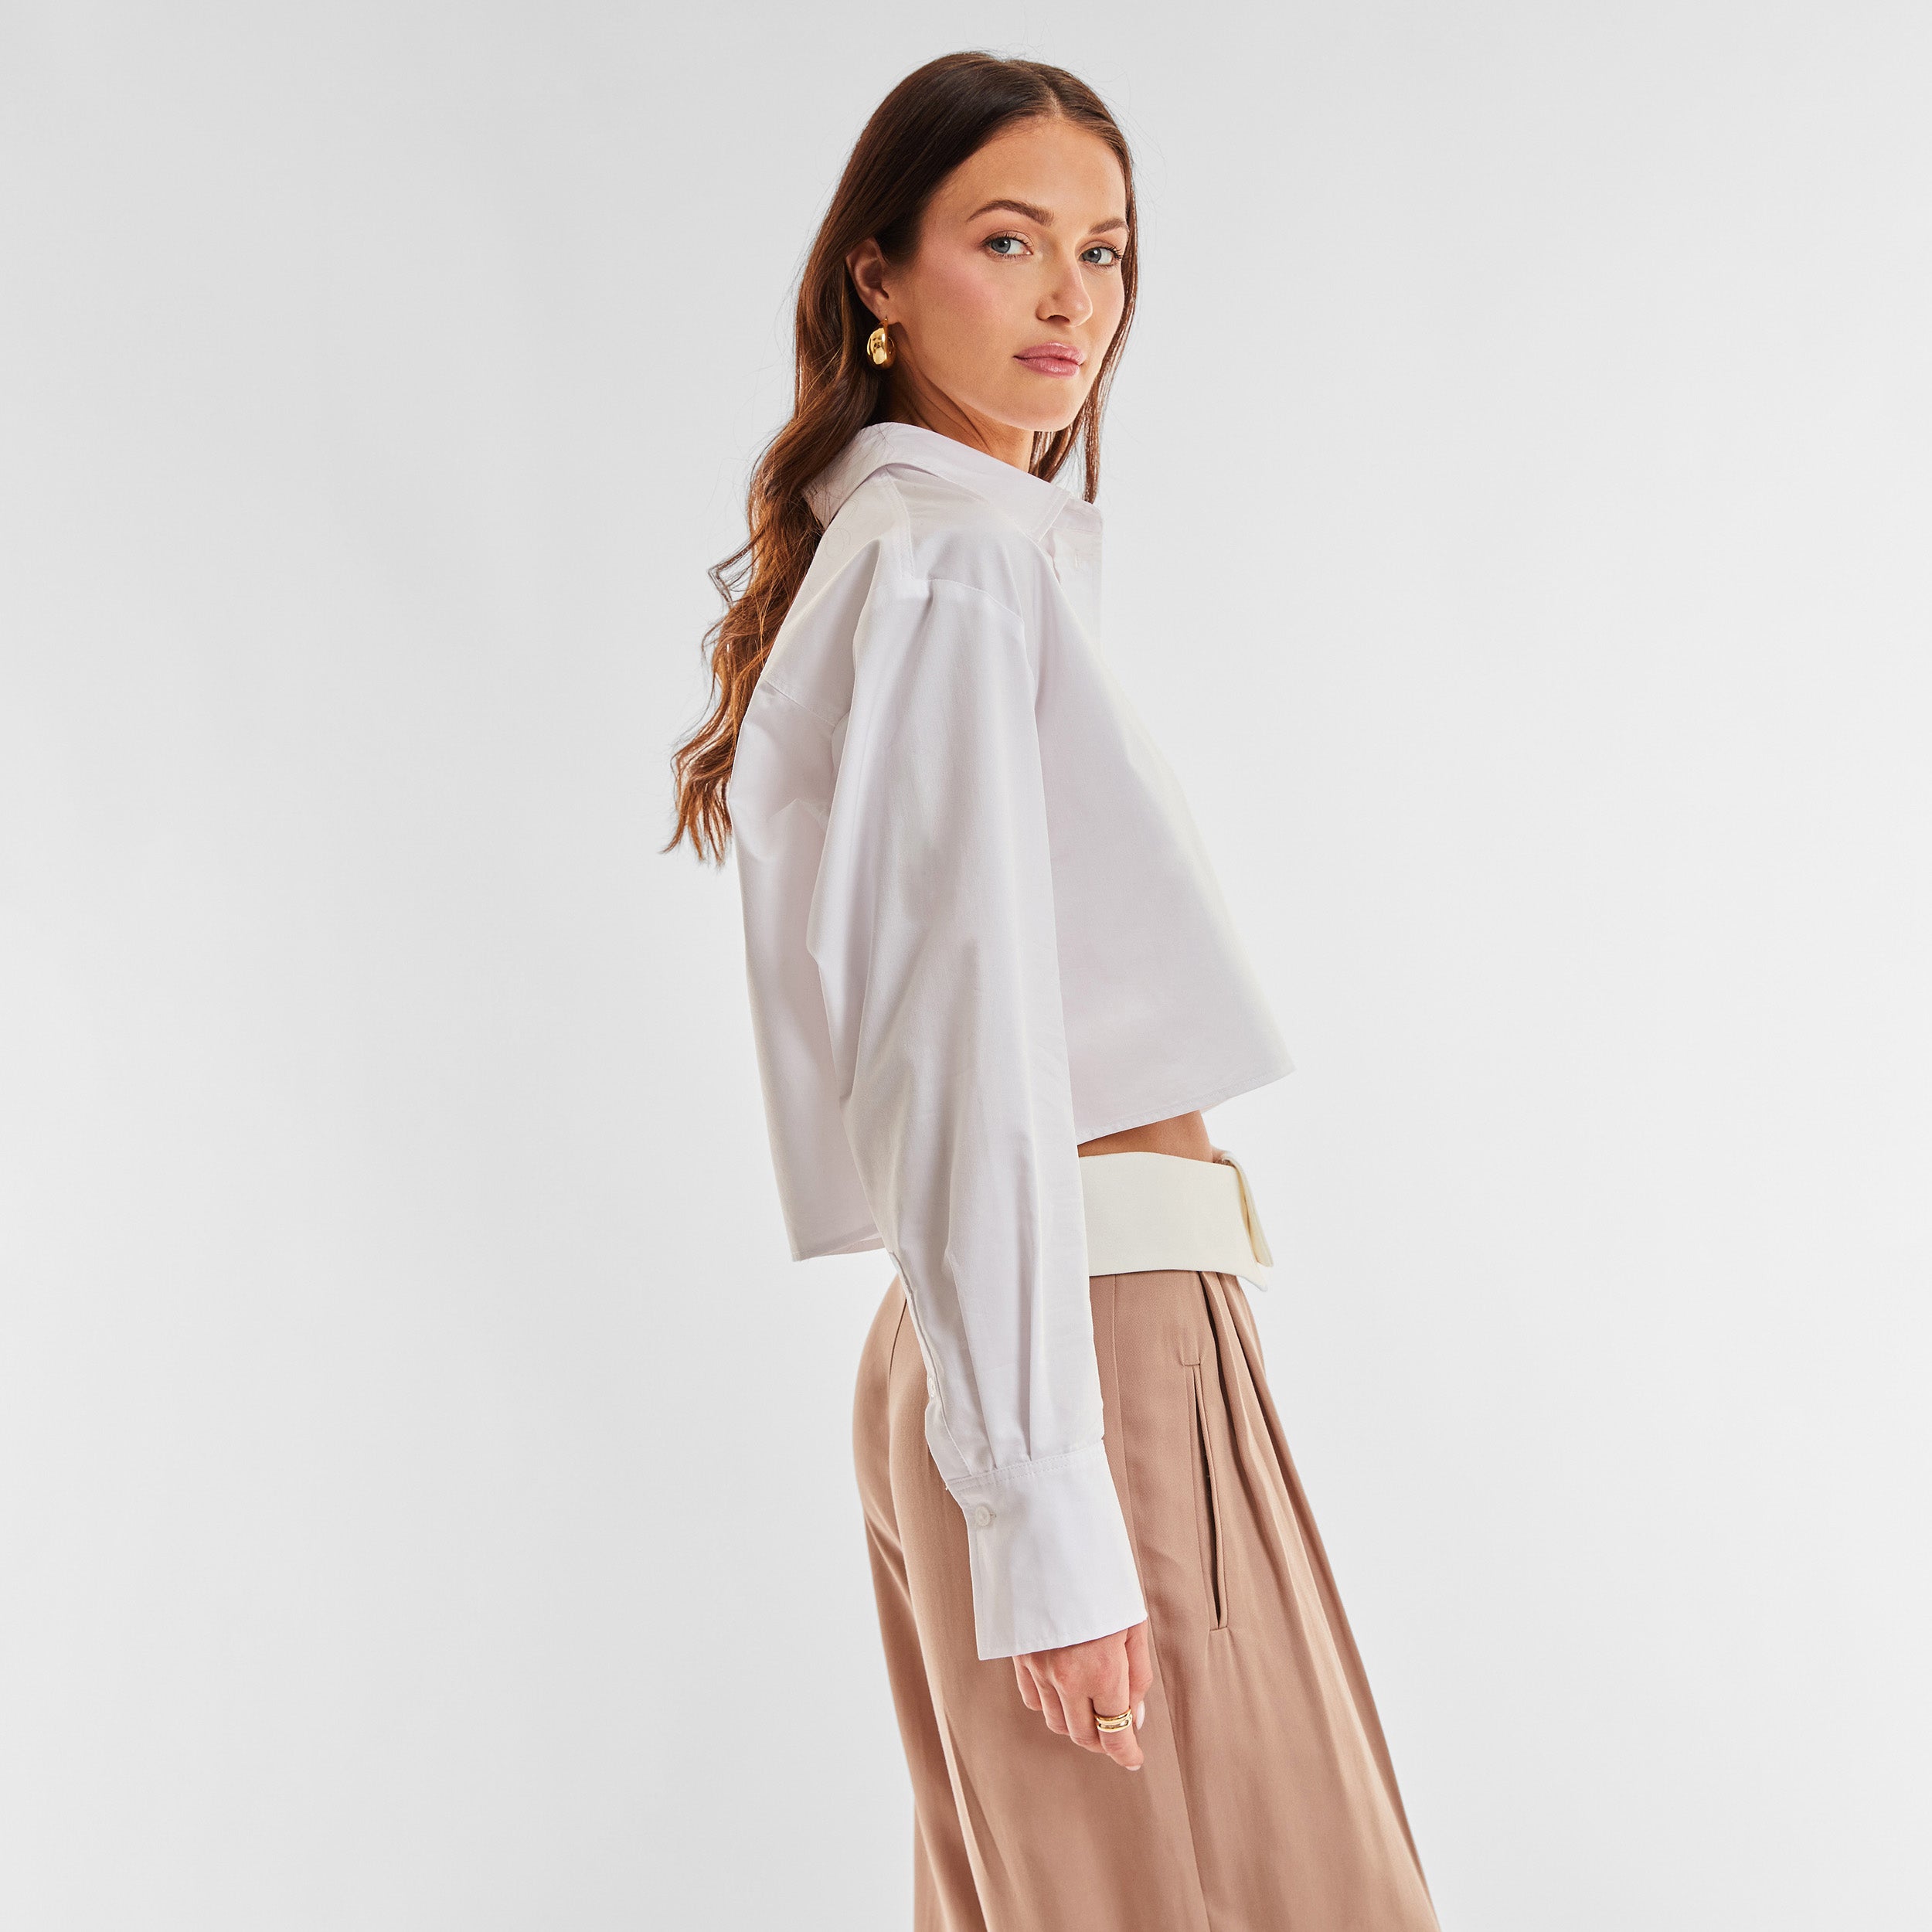 Side view of woman wearing a cropped white buttonup shirt and foldover waist mocha colored pant